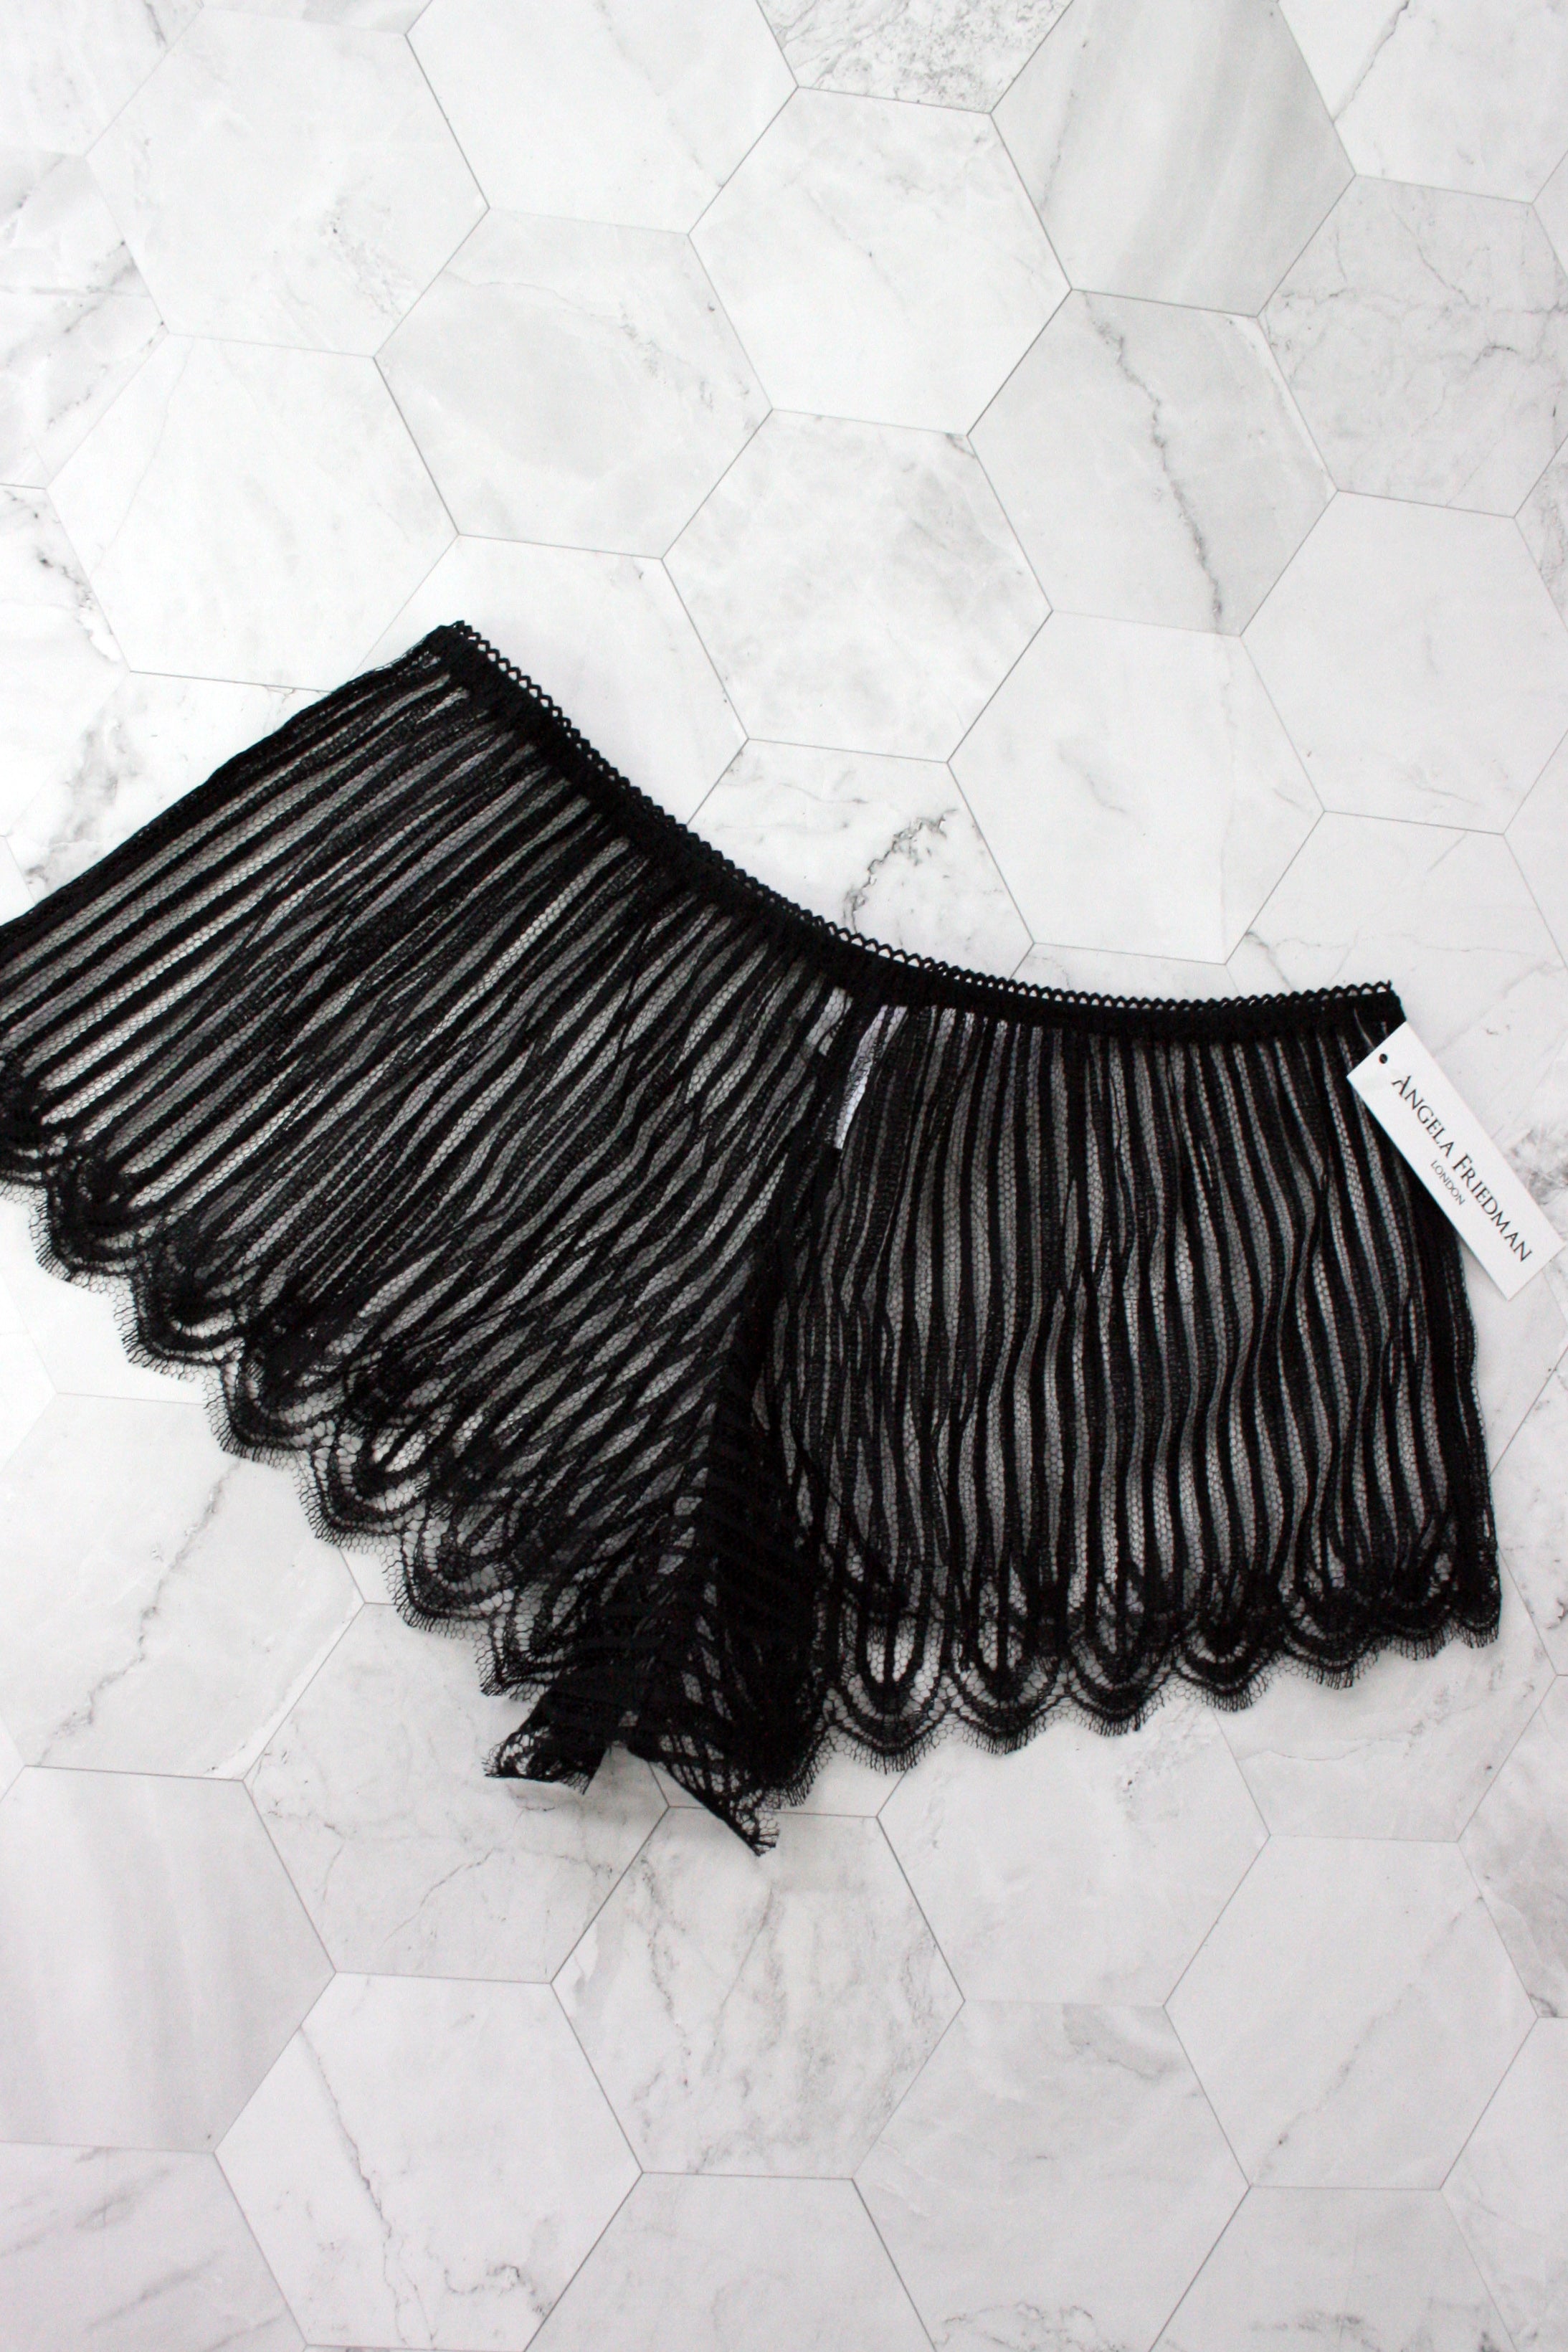 Luxury designer tap pants, handmade of striped French lace